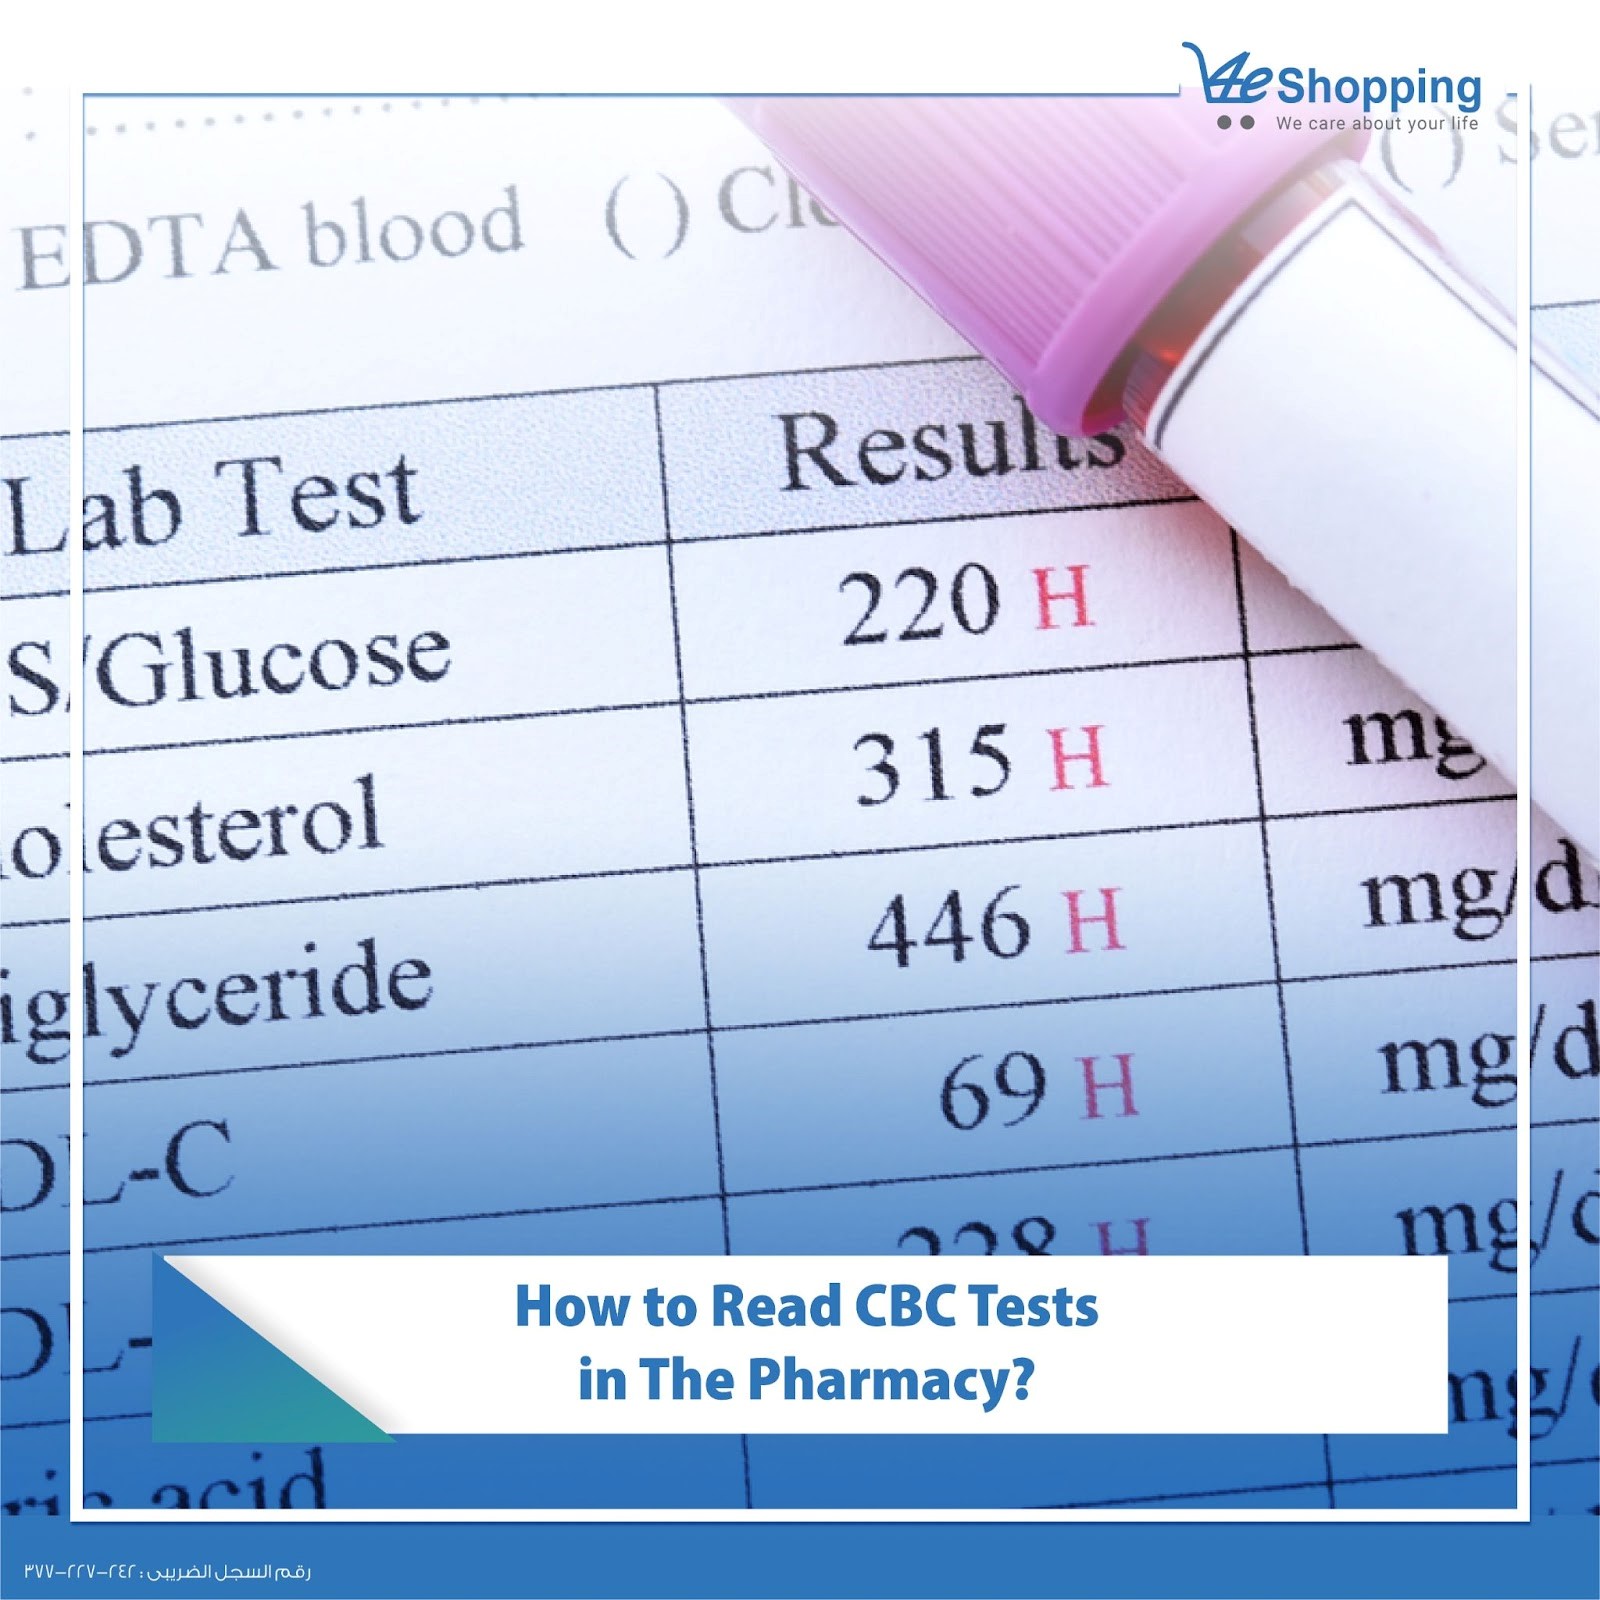 How to read CBC tests in the pharmacy?